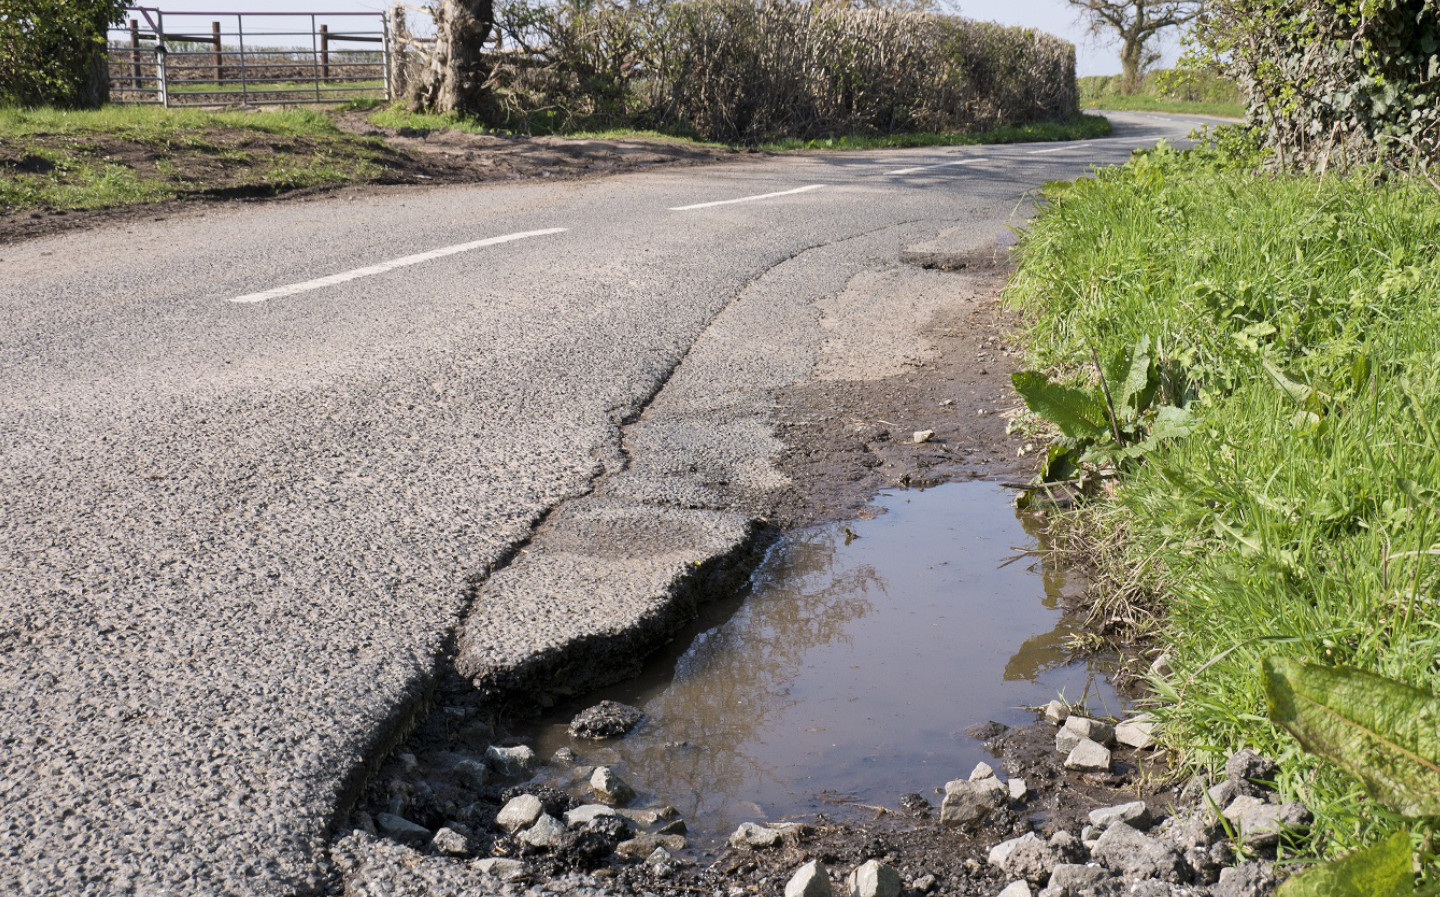 9 in 10 drivers affected by potholes last year